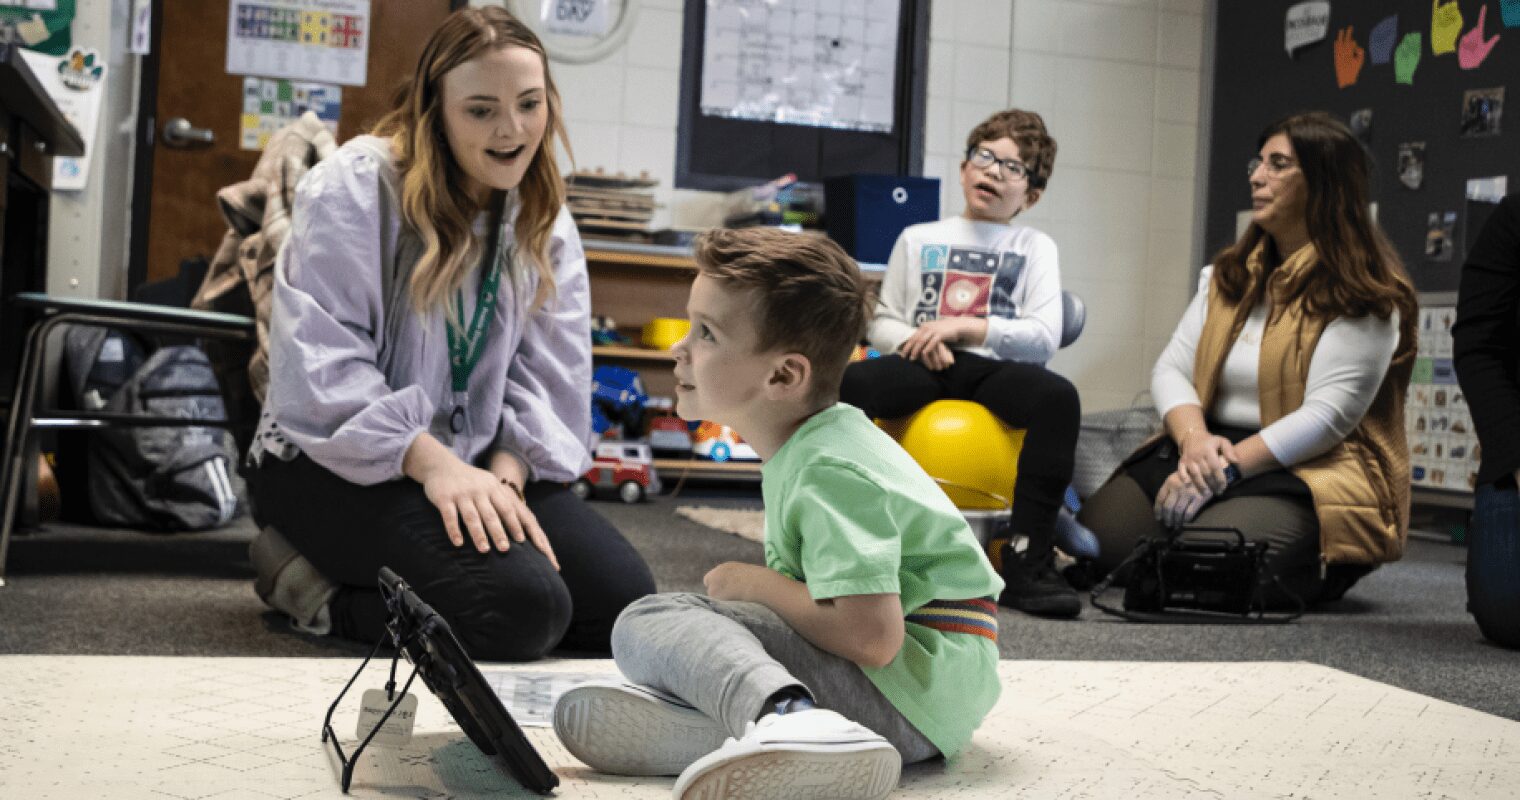 An educator plays with a student using an AAC device in a classroom and watching something on a screen at the front of the room. Another teacher and student, sitting on a ball chair, watch in the background.